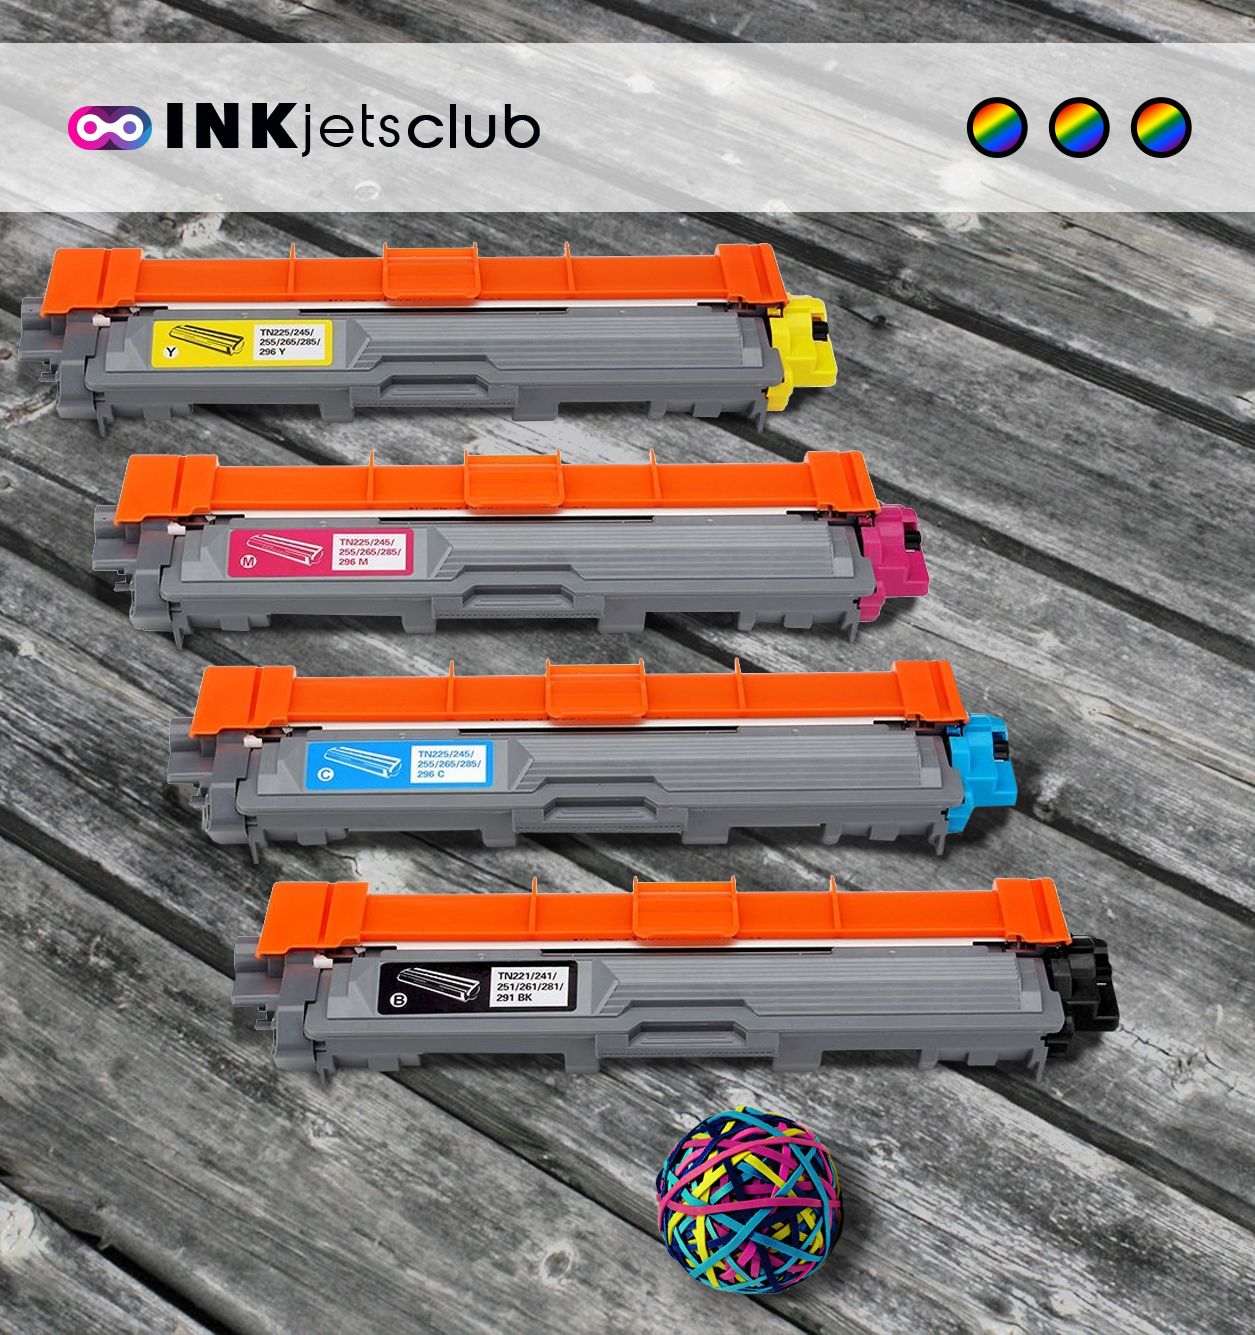 Brother MFC 9330CW toner cartridges - buy ink refills for Brother